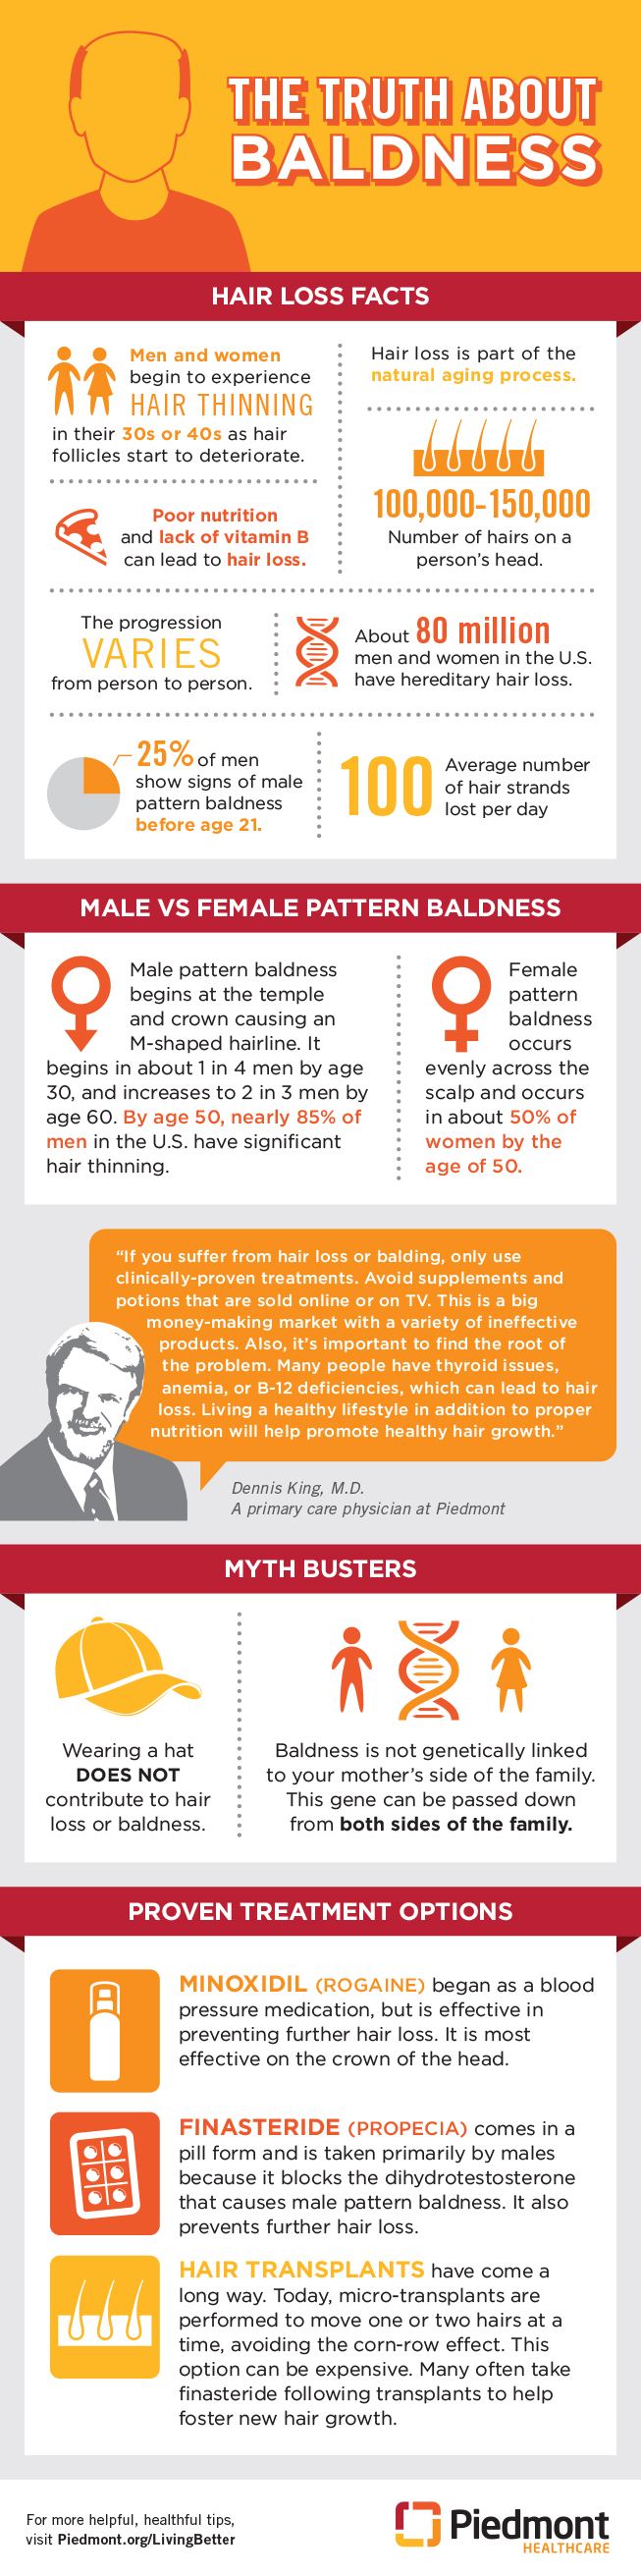 The truth about baldness graphic